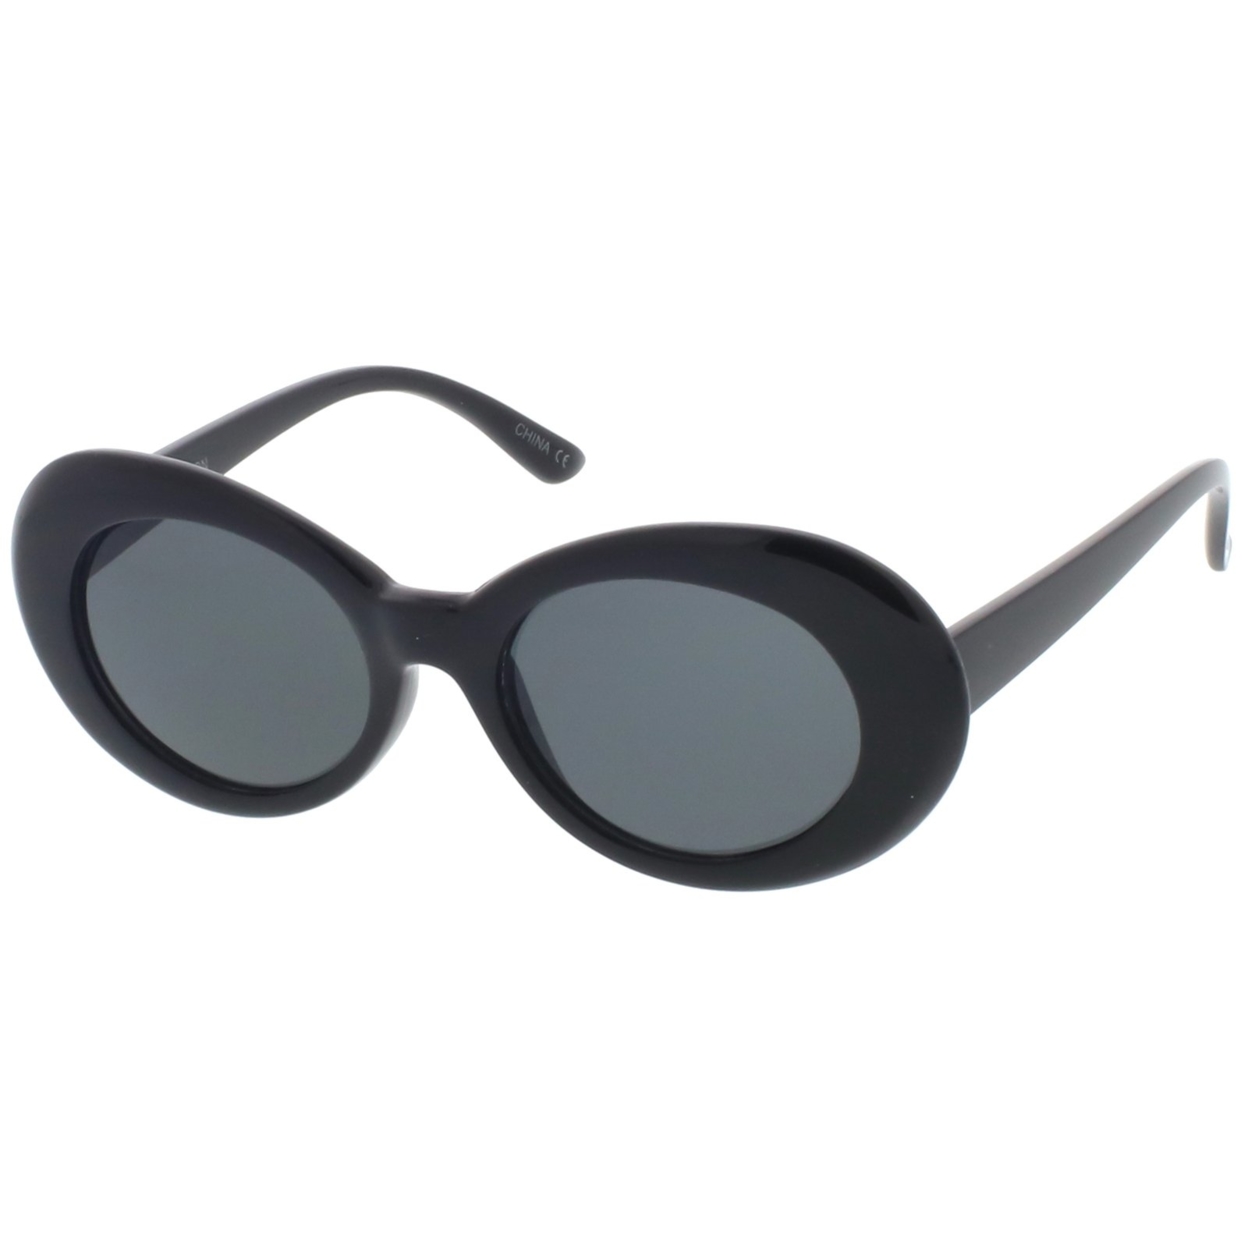 Retro Oval Sunglasses With Tapered Arms Neutral Colored Round Lens 51mm - Red / Smoke